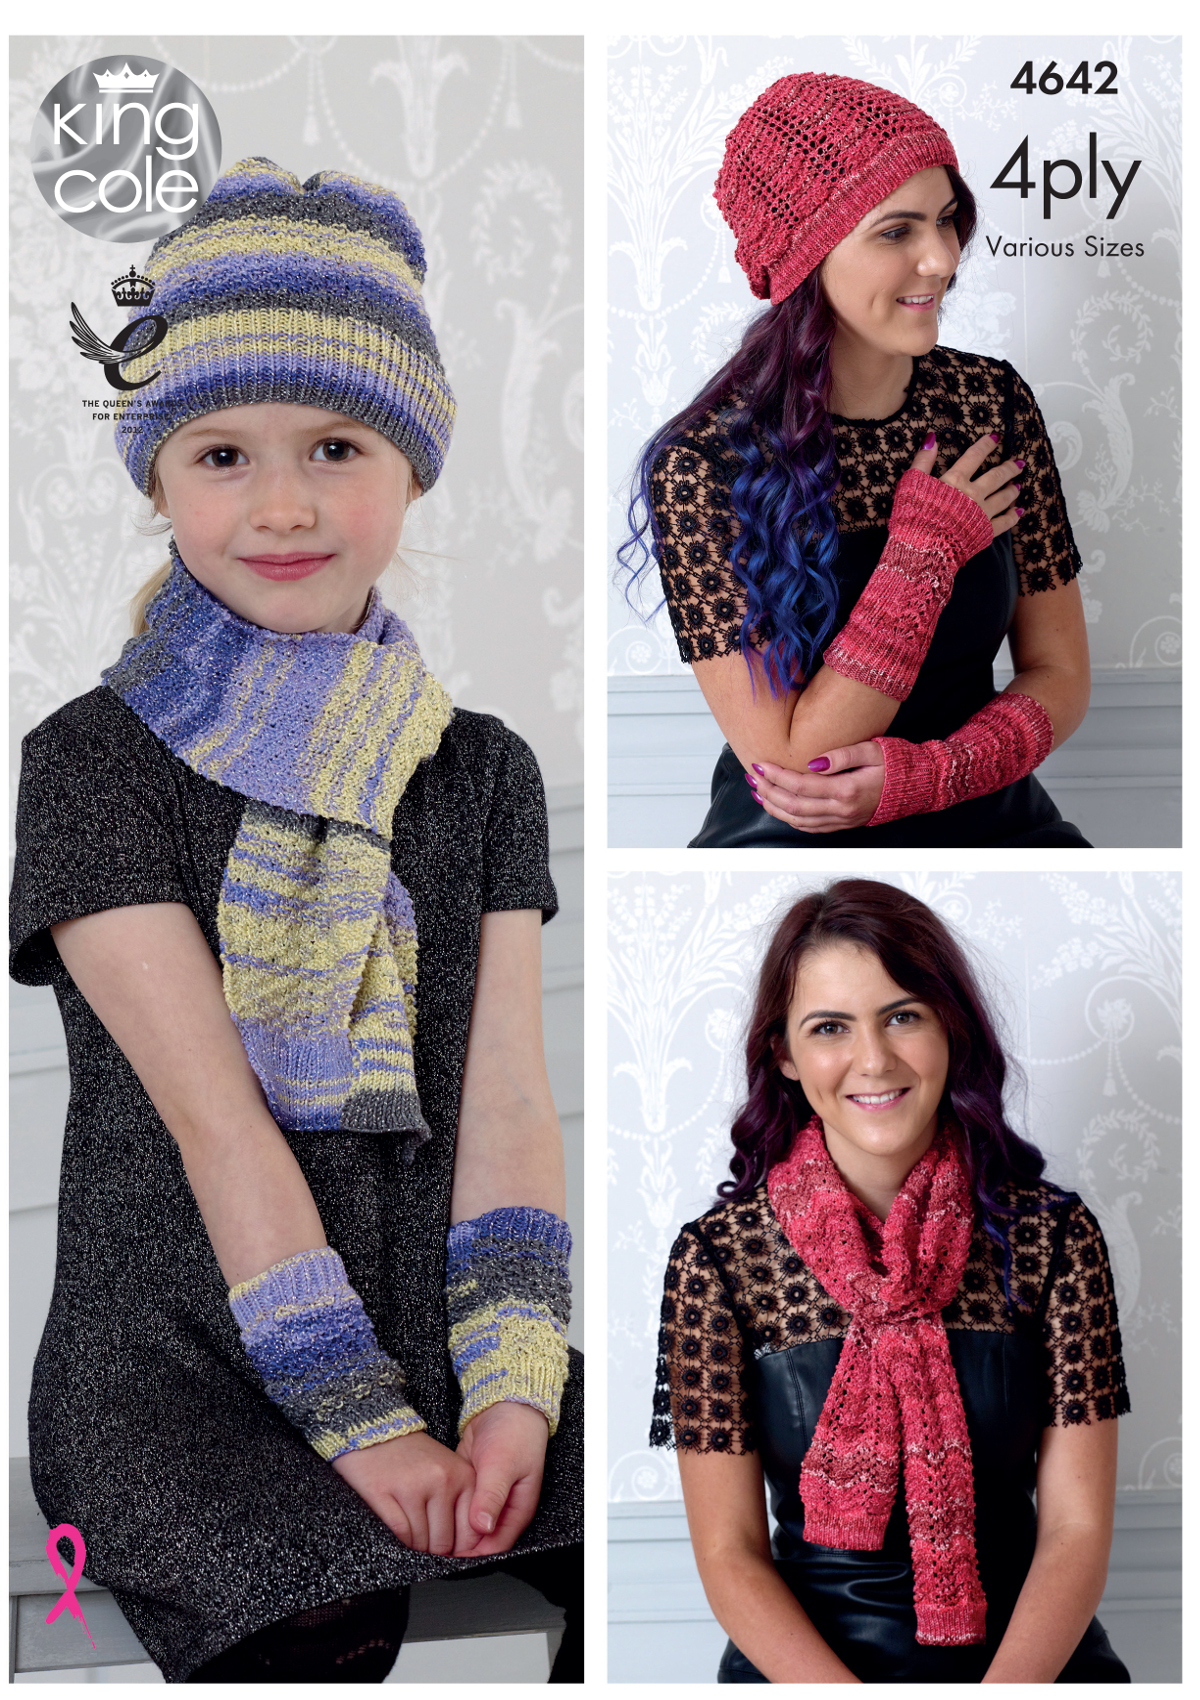 Ladies Scarf Knitting Pattern Details About King Cole Ladies Girls 4 Ply Knitting Pattern Scarf Hat Wrist Warmers 4642